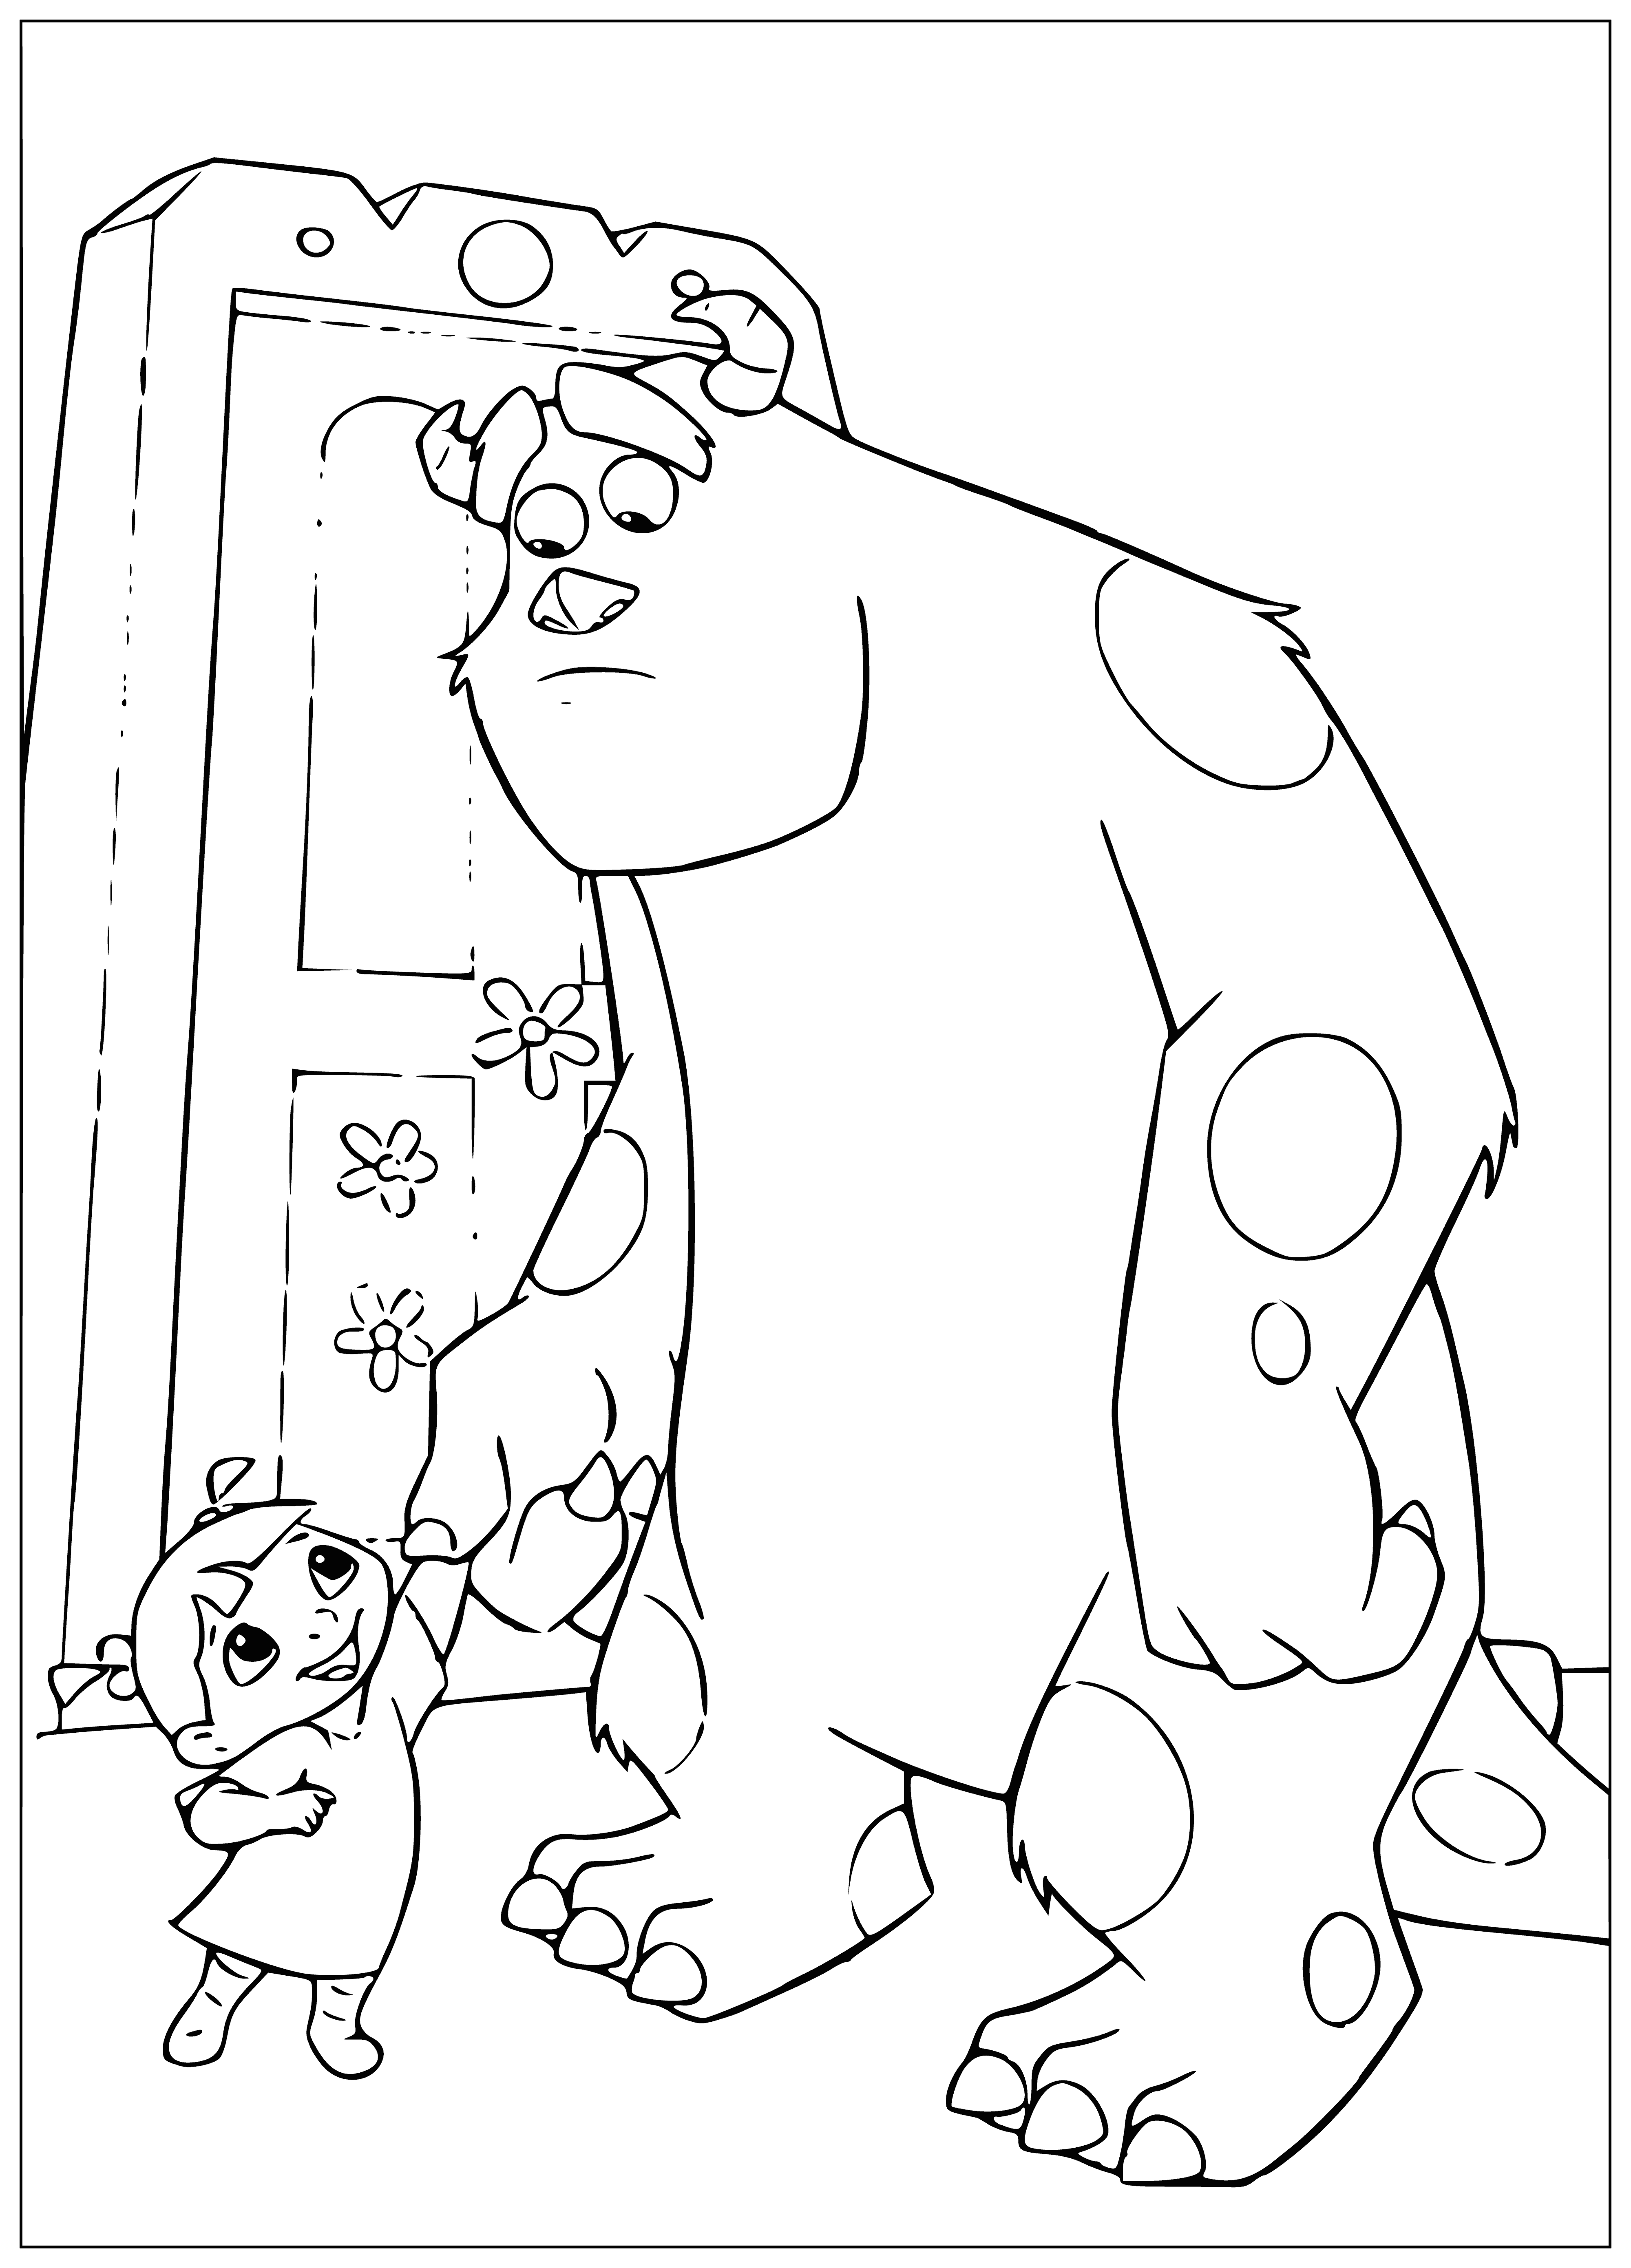 Girl and Sally coloring page